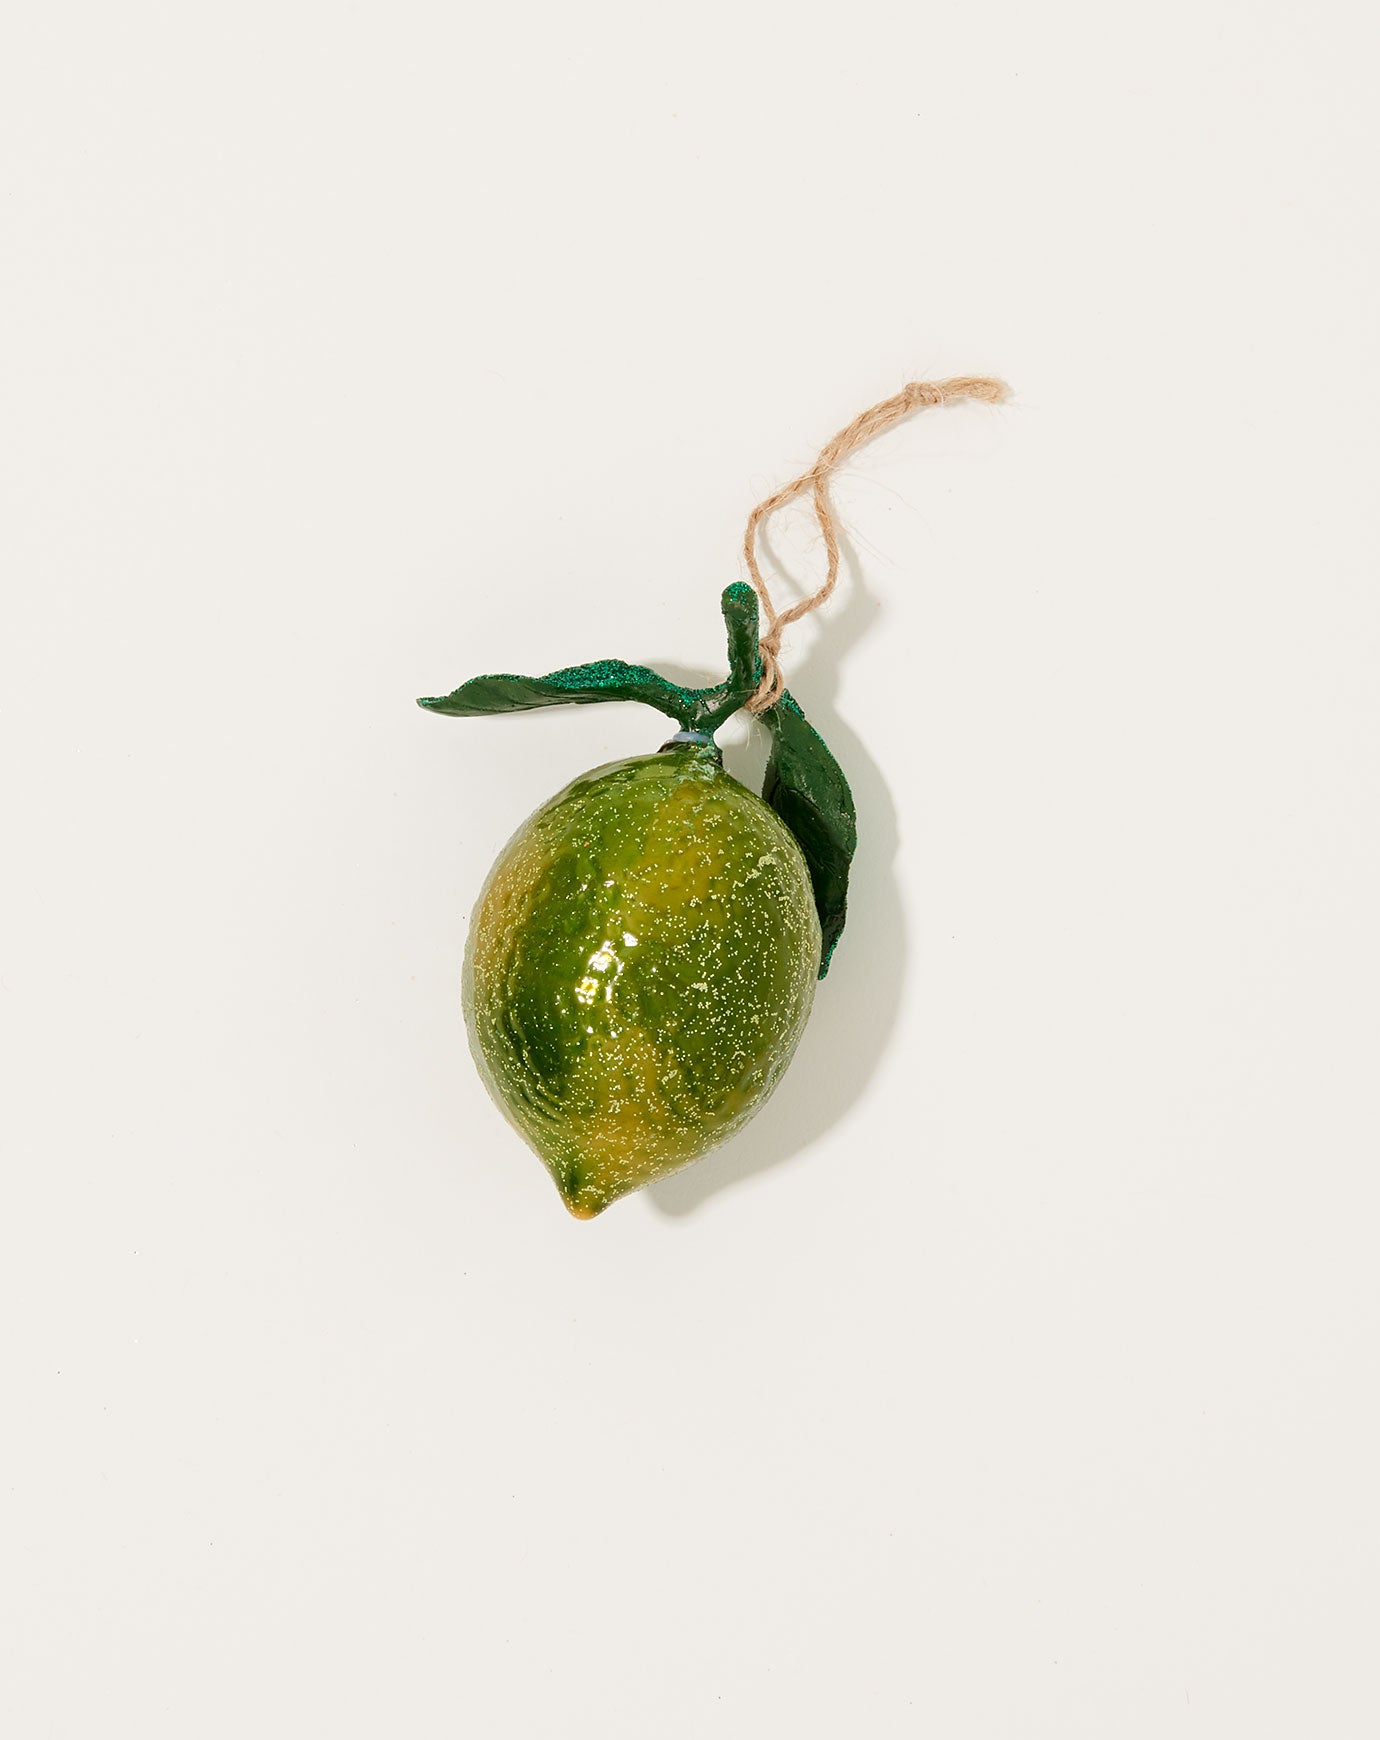 Cody Foster Orchard Lime Ornament